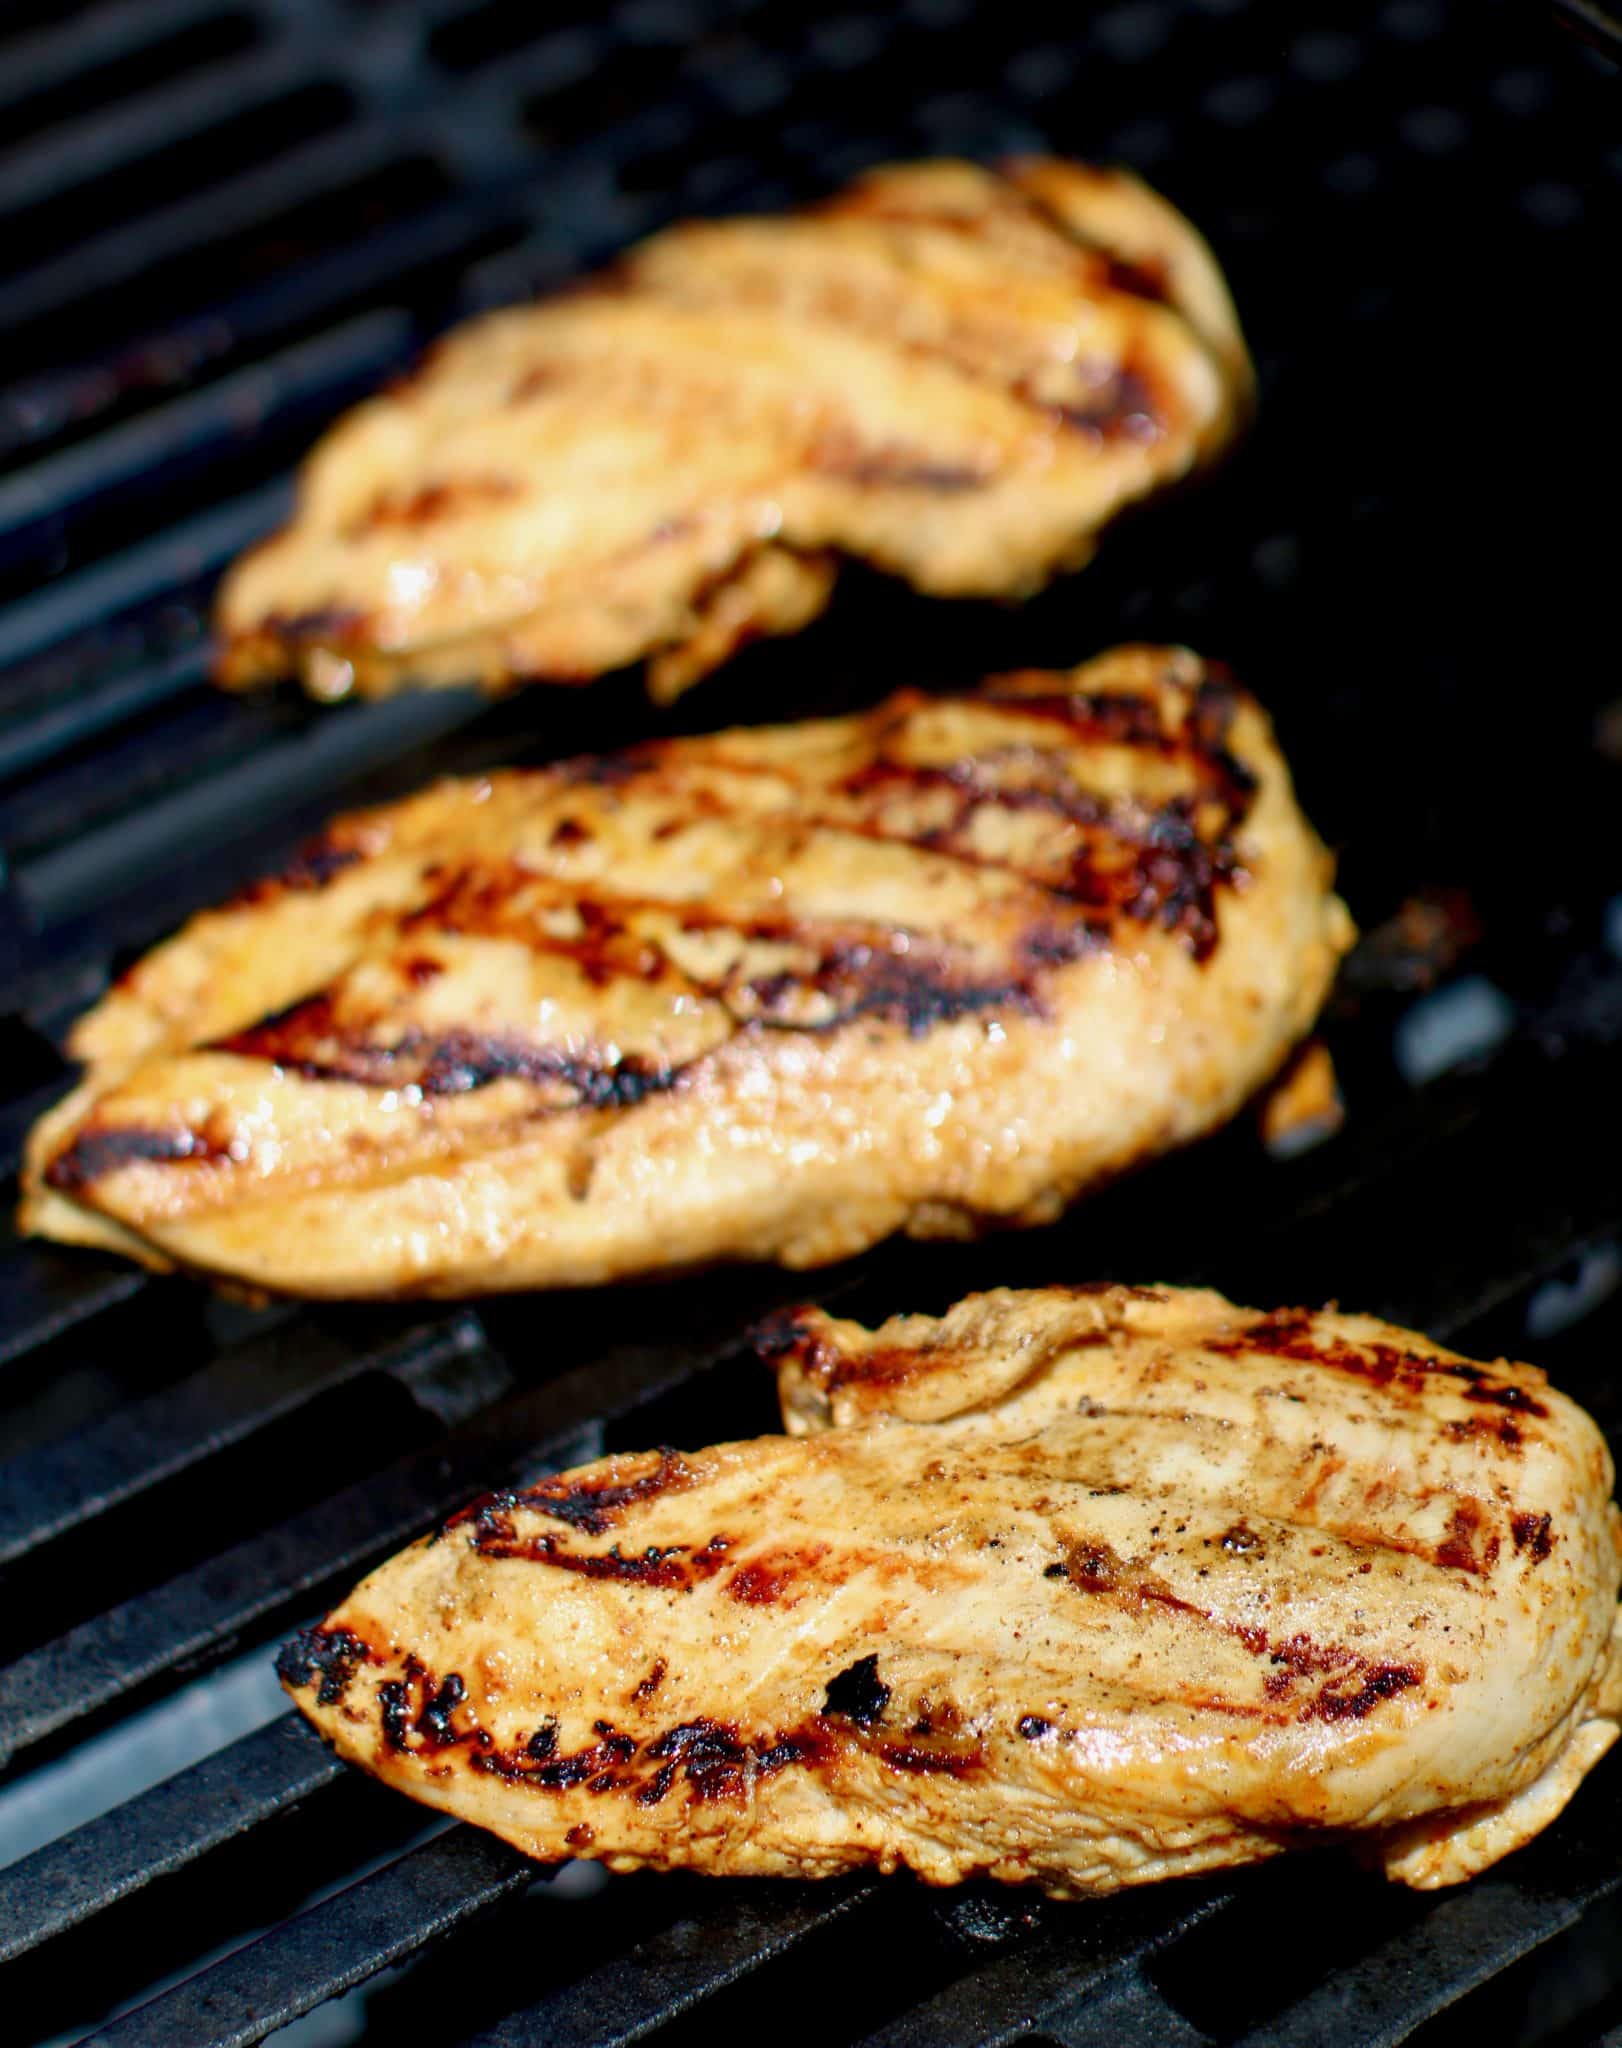 Pollo Loco (Grilled Lime Chicken)